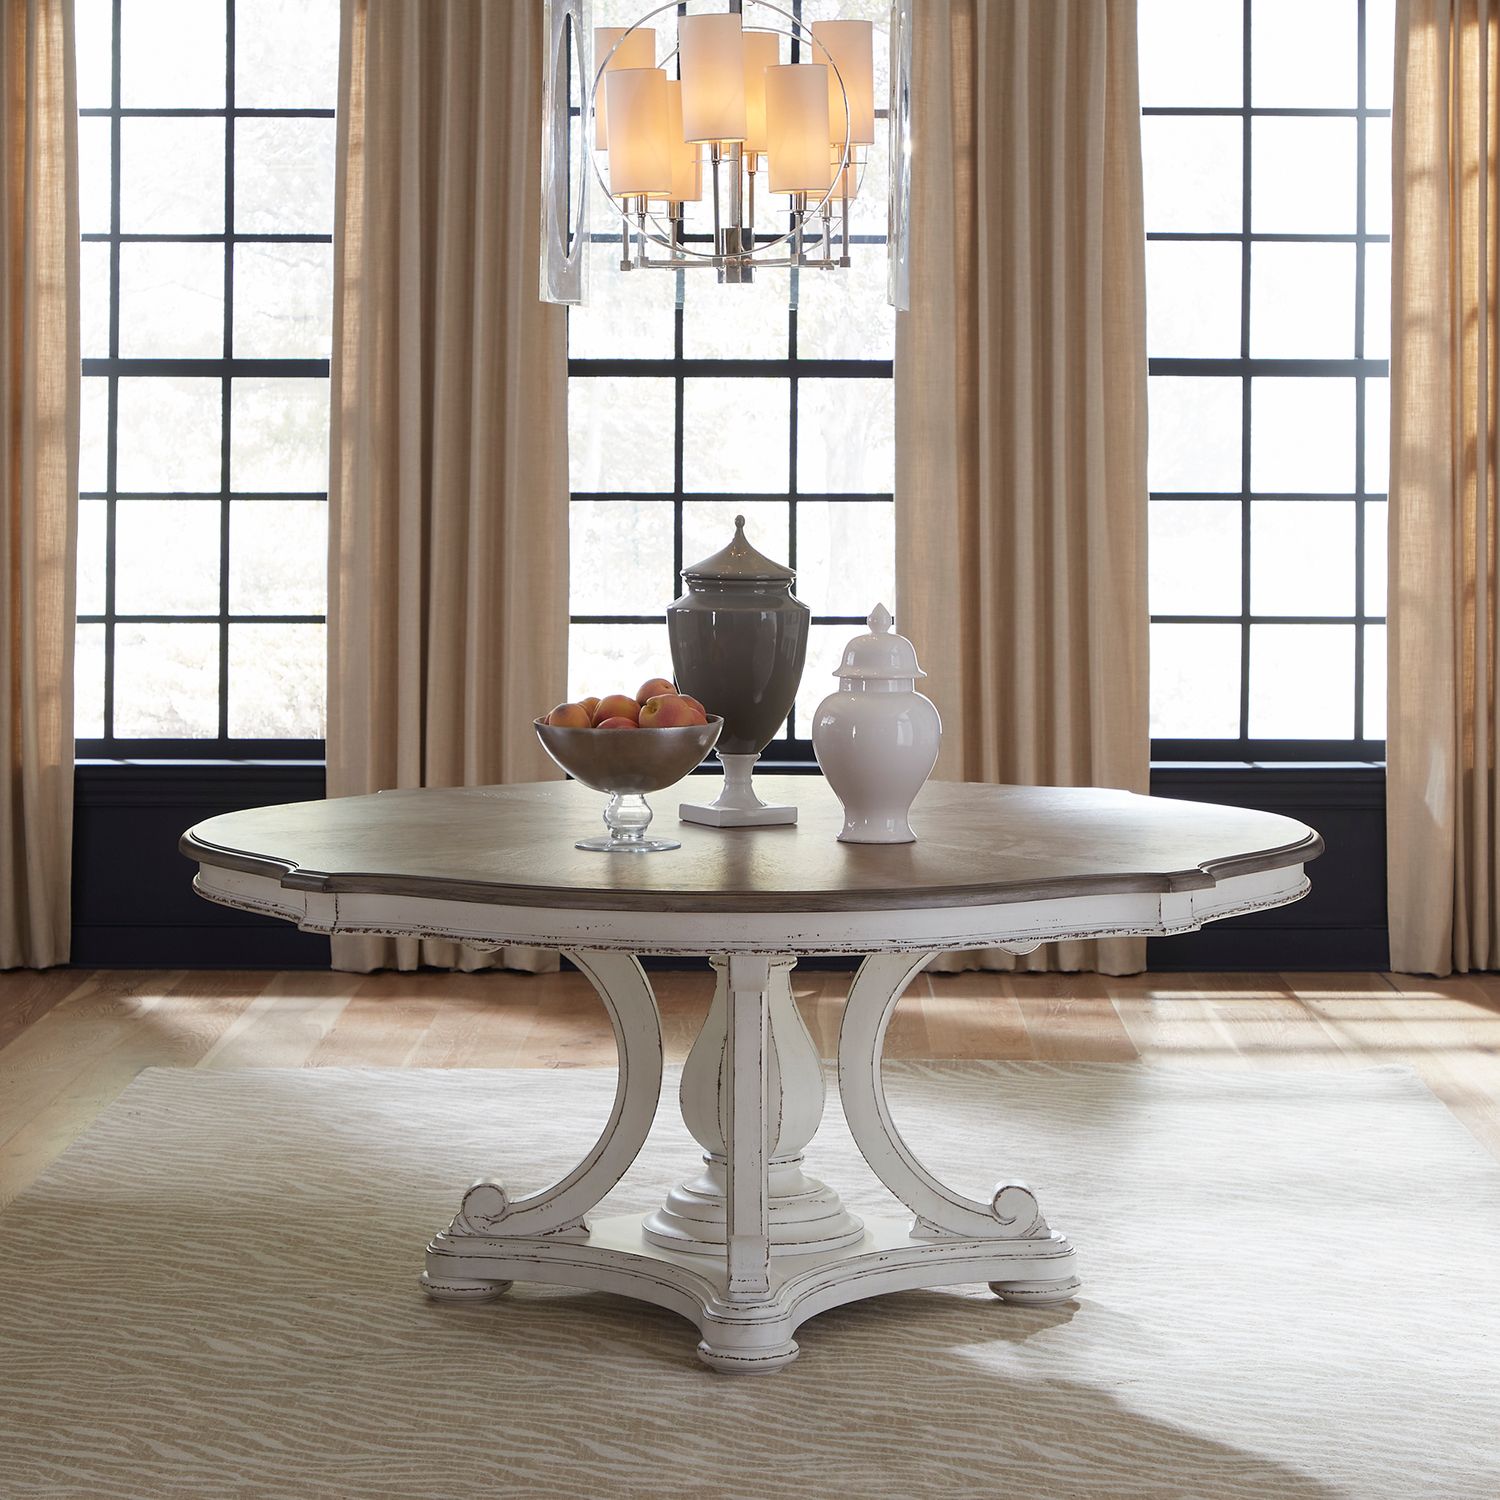 Magnolia Manor 7 Piece 72 in Round Pedastel Table Set  SKU: 244-DR-7RPS by Liberty Furniture